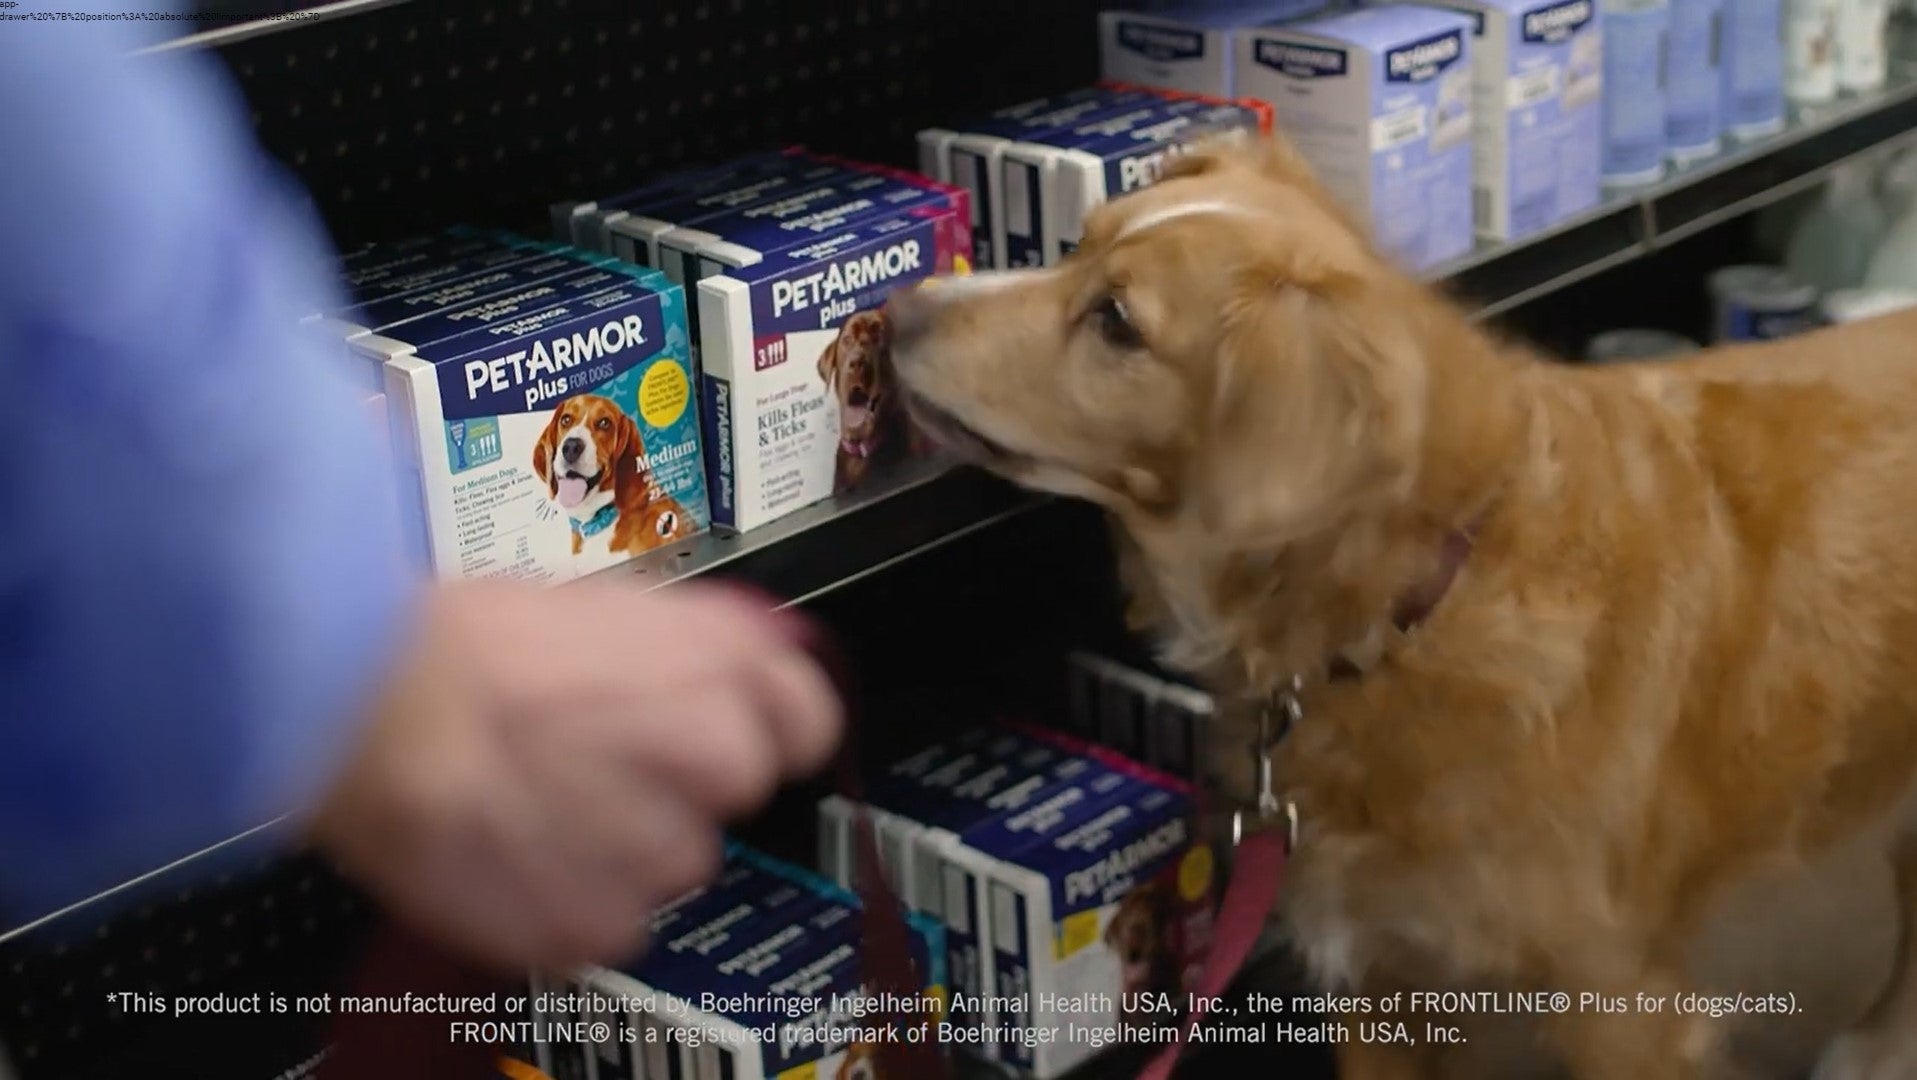 Video still image showing a dog picking out PetArmor Plus at the store